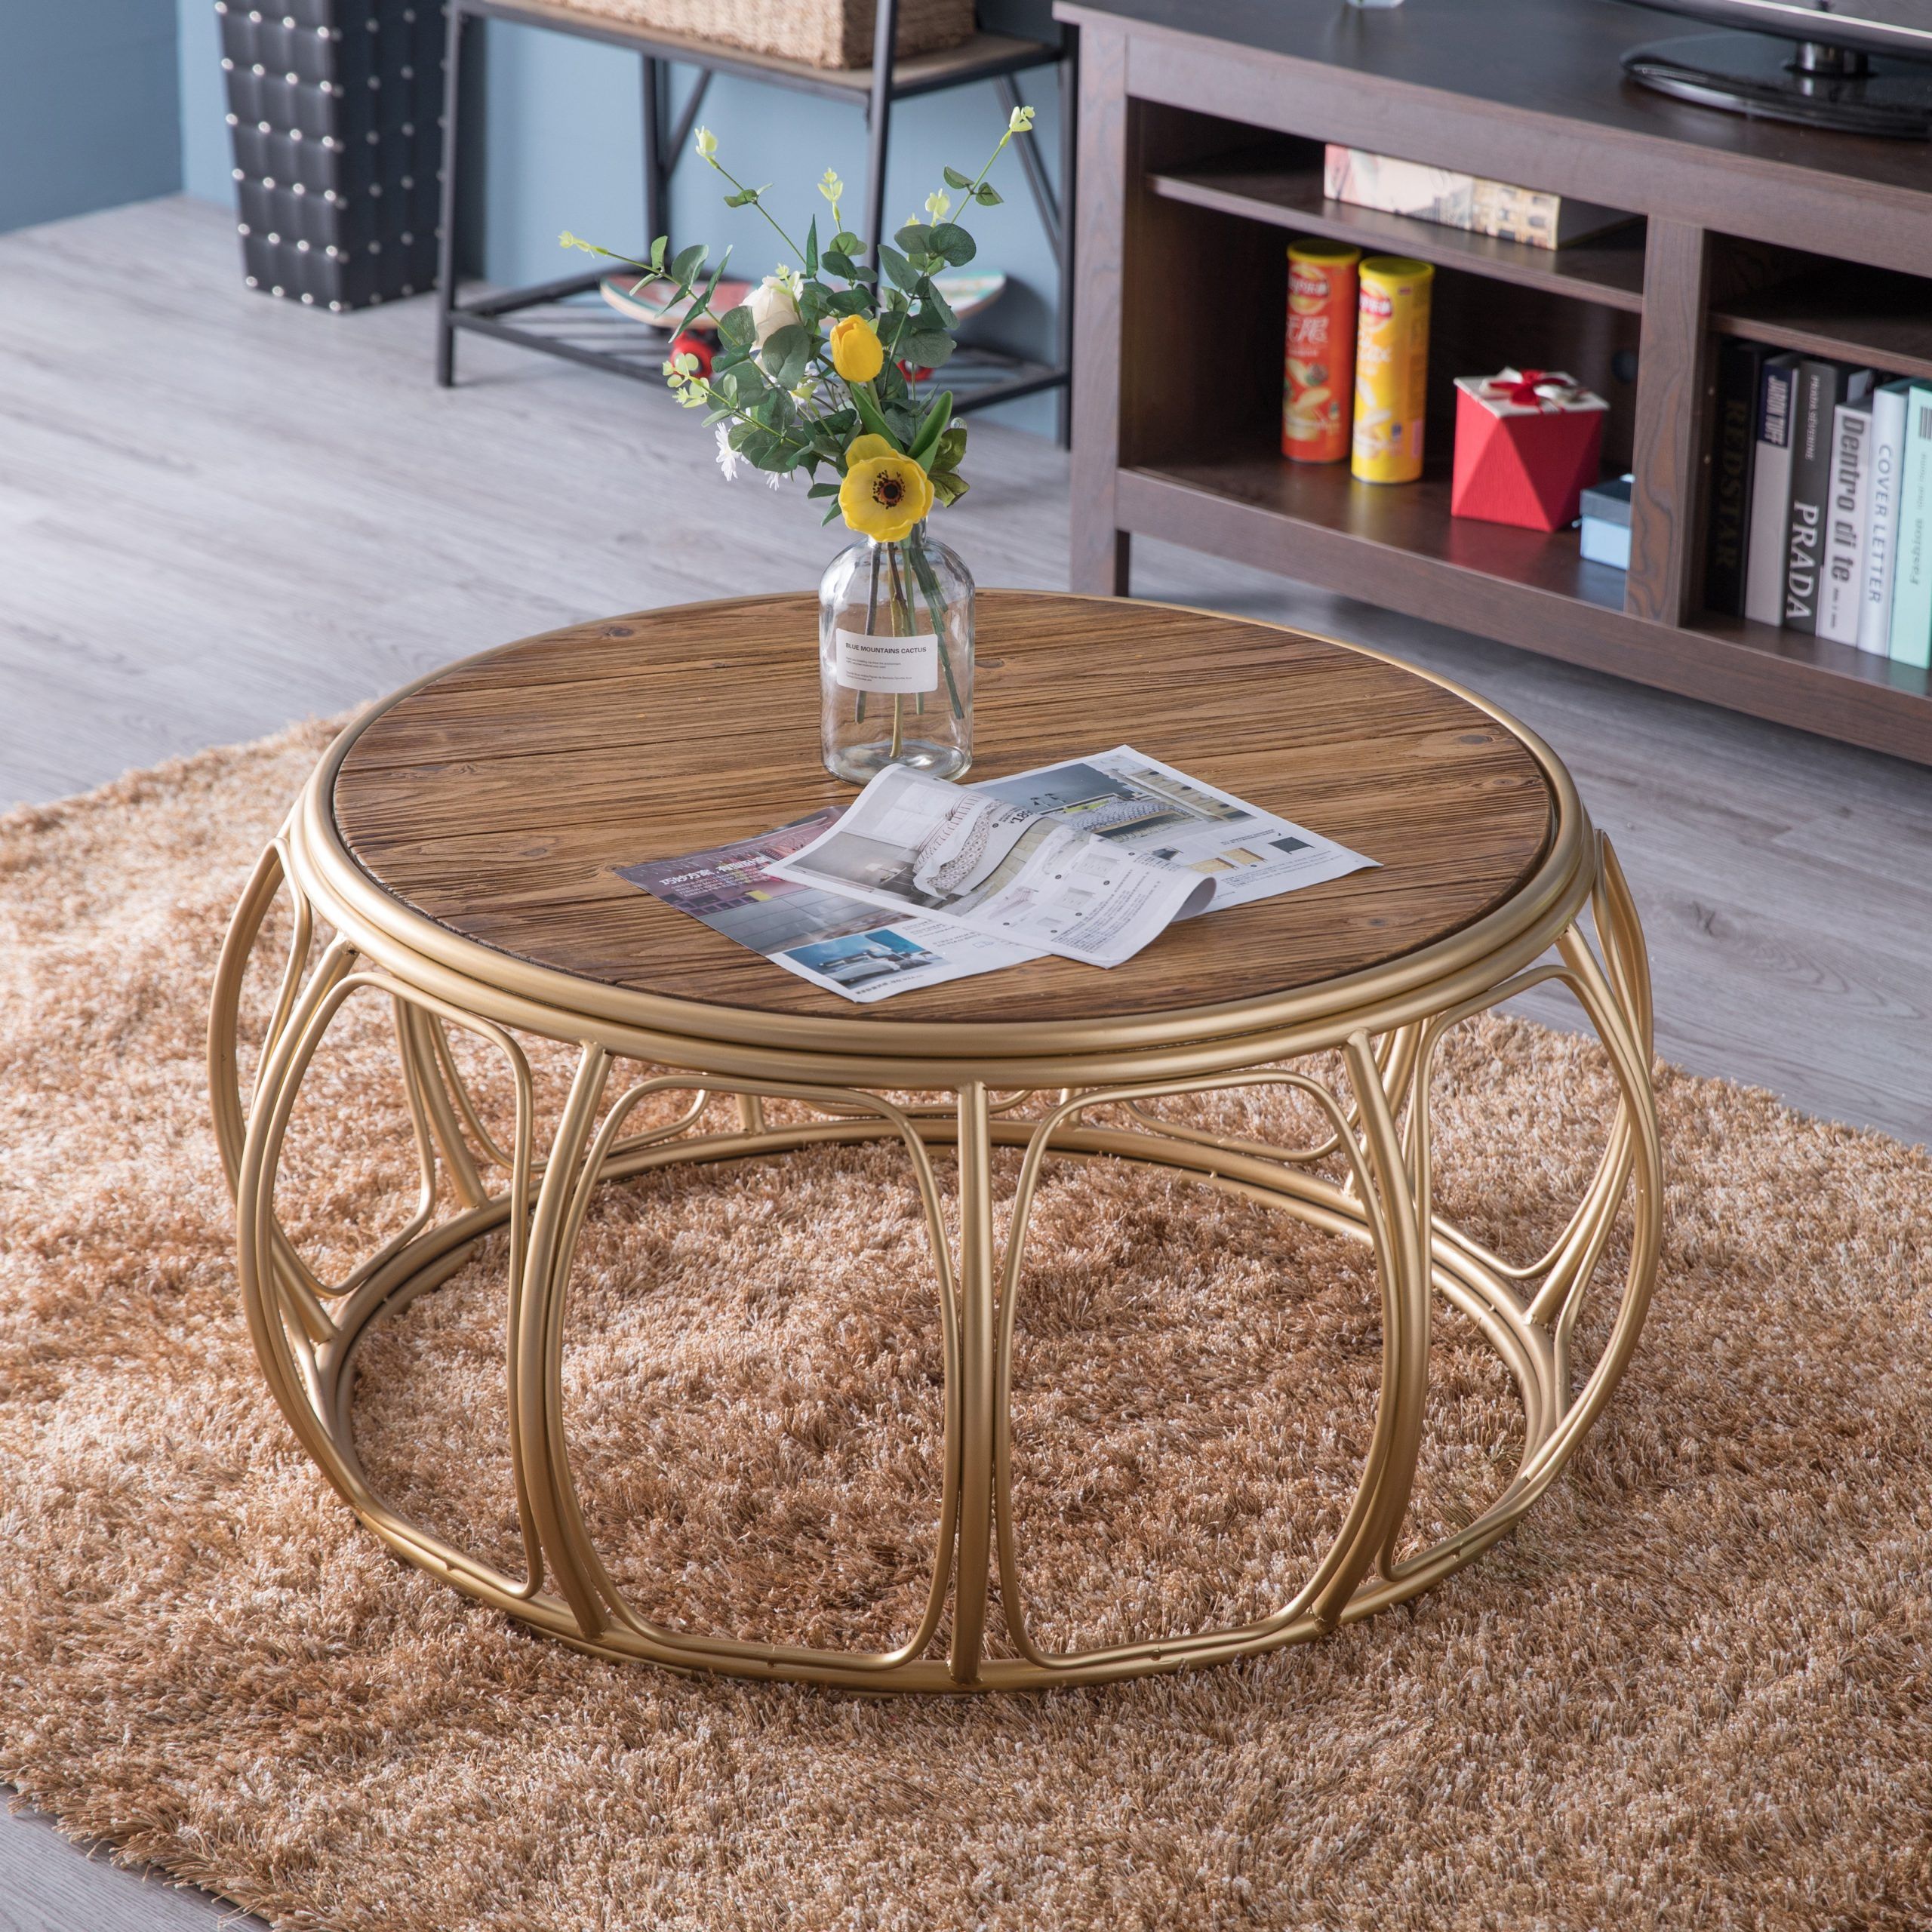 New Bold Tones Large Round Wood And Metal Coffee Table, Qi003517l | Ebay Intended For Coffee Tables With Round Wooden Tops (View 19 of 20)